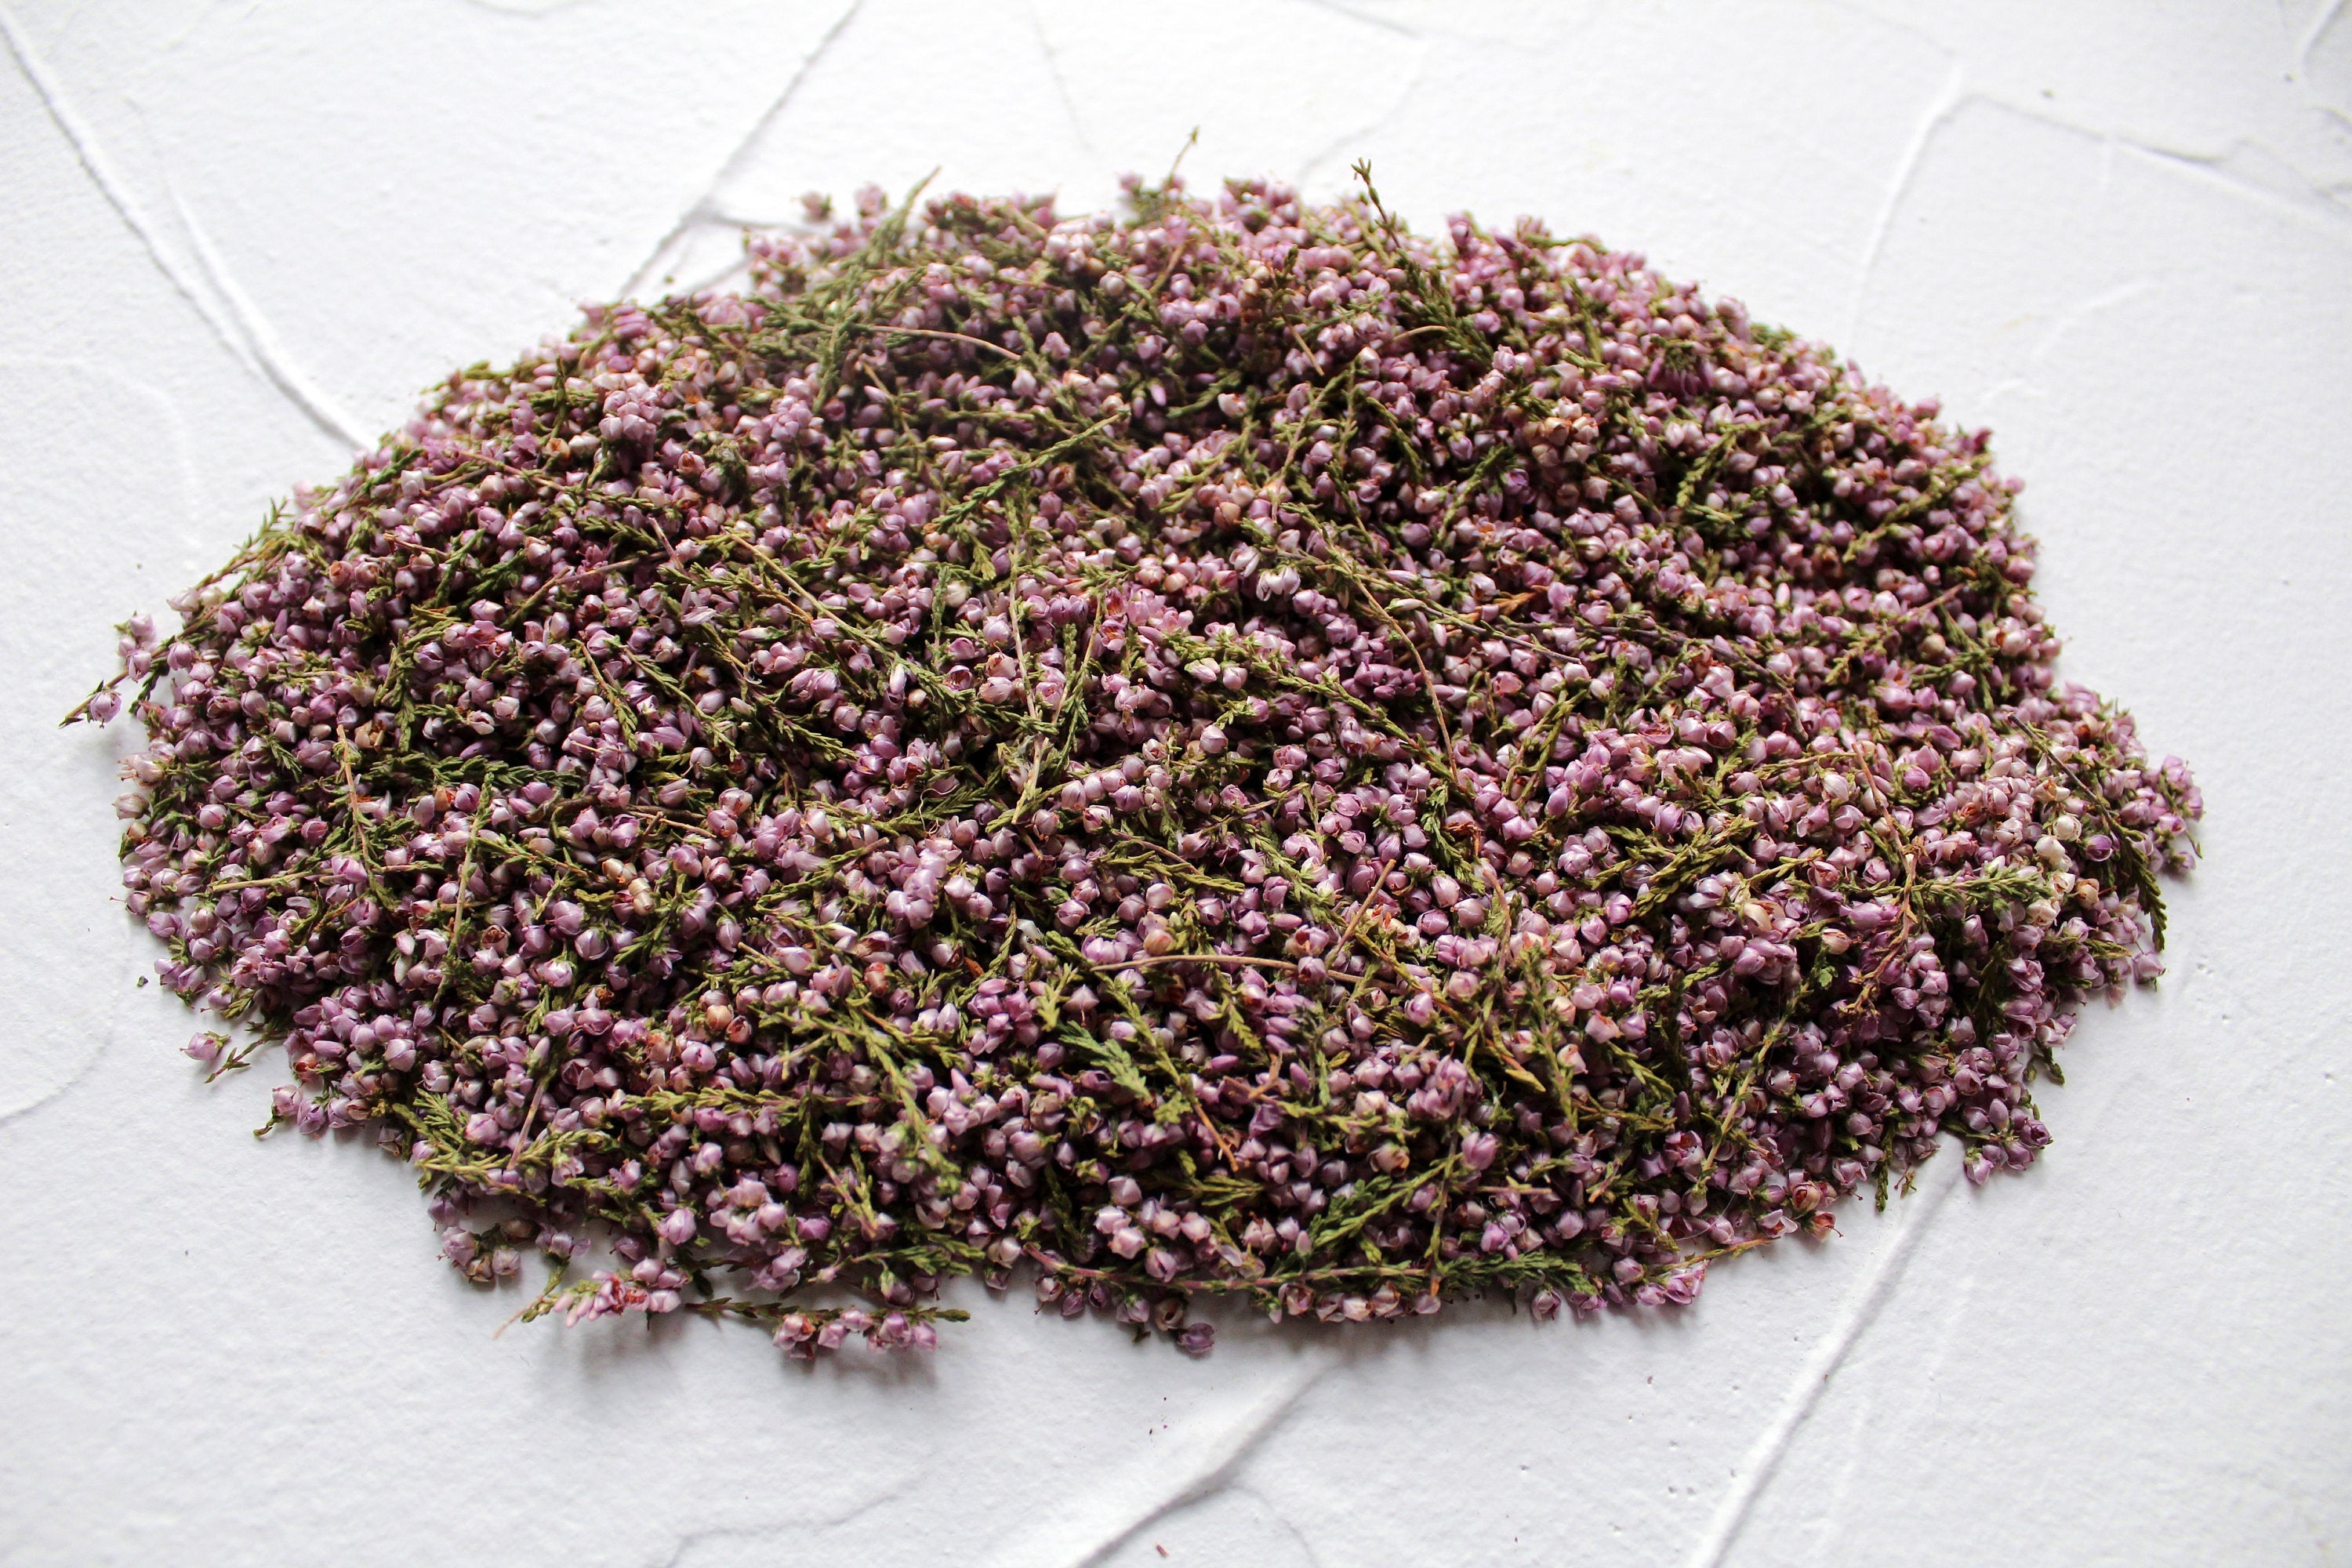 Heather flowers whole, Heather, High Quality, Natural, Wild grow, Organic, Biodegradable, Wedding, Craft, Edible, Confetti